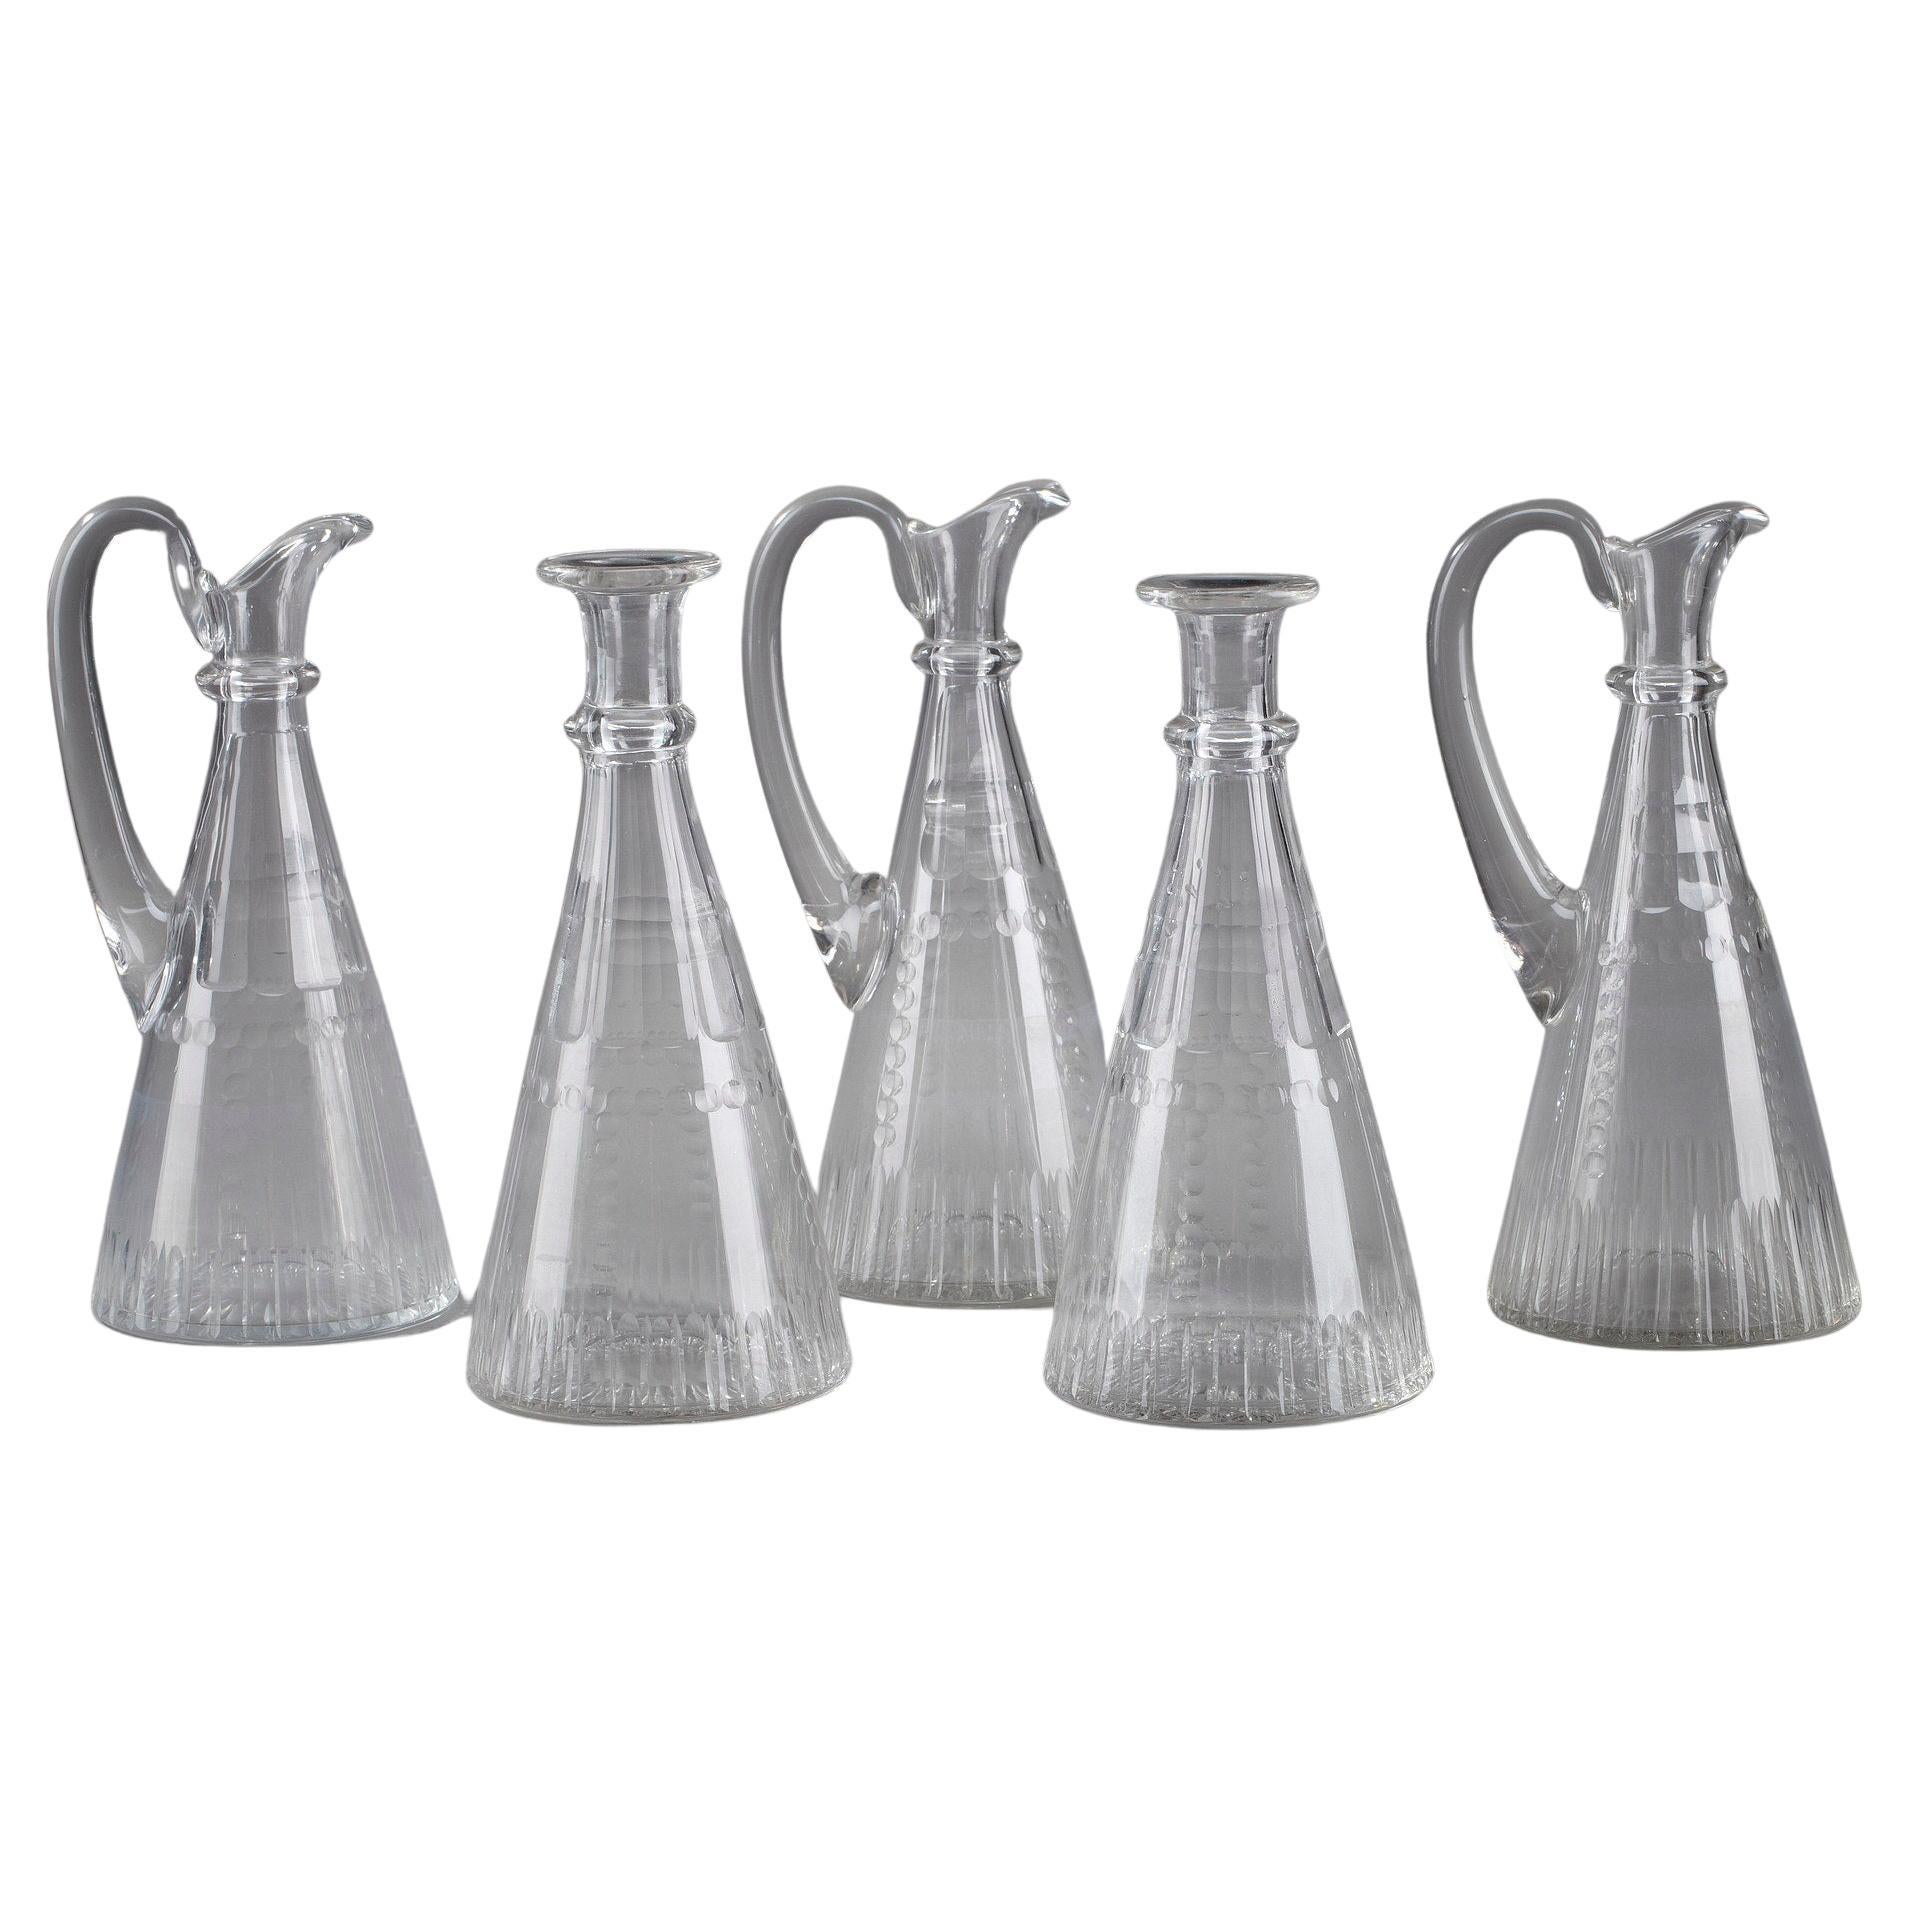 Set of Pitchers and Decanters in Molded Glass For Sale